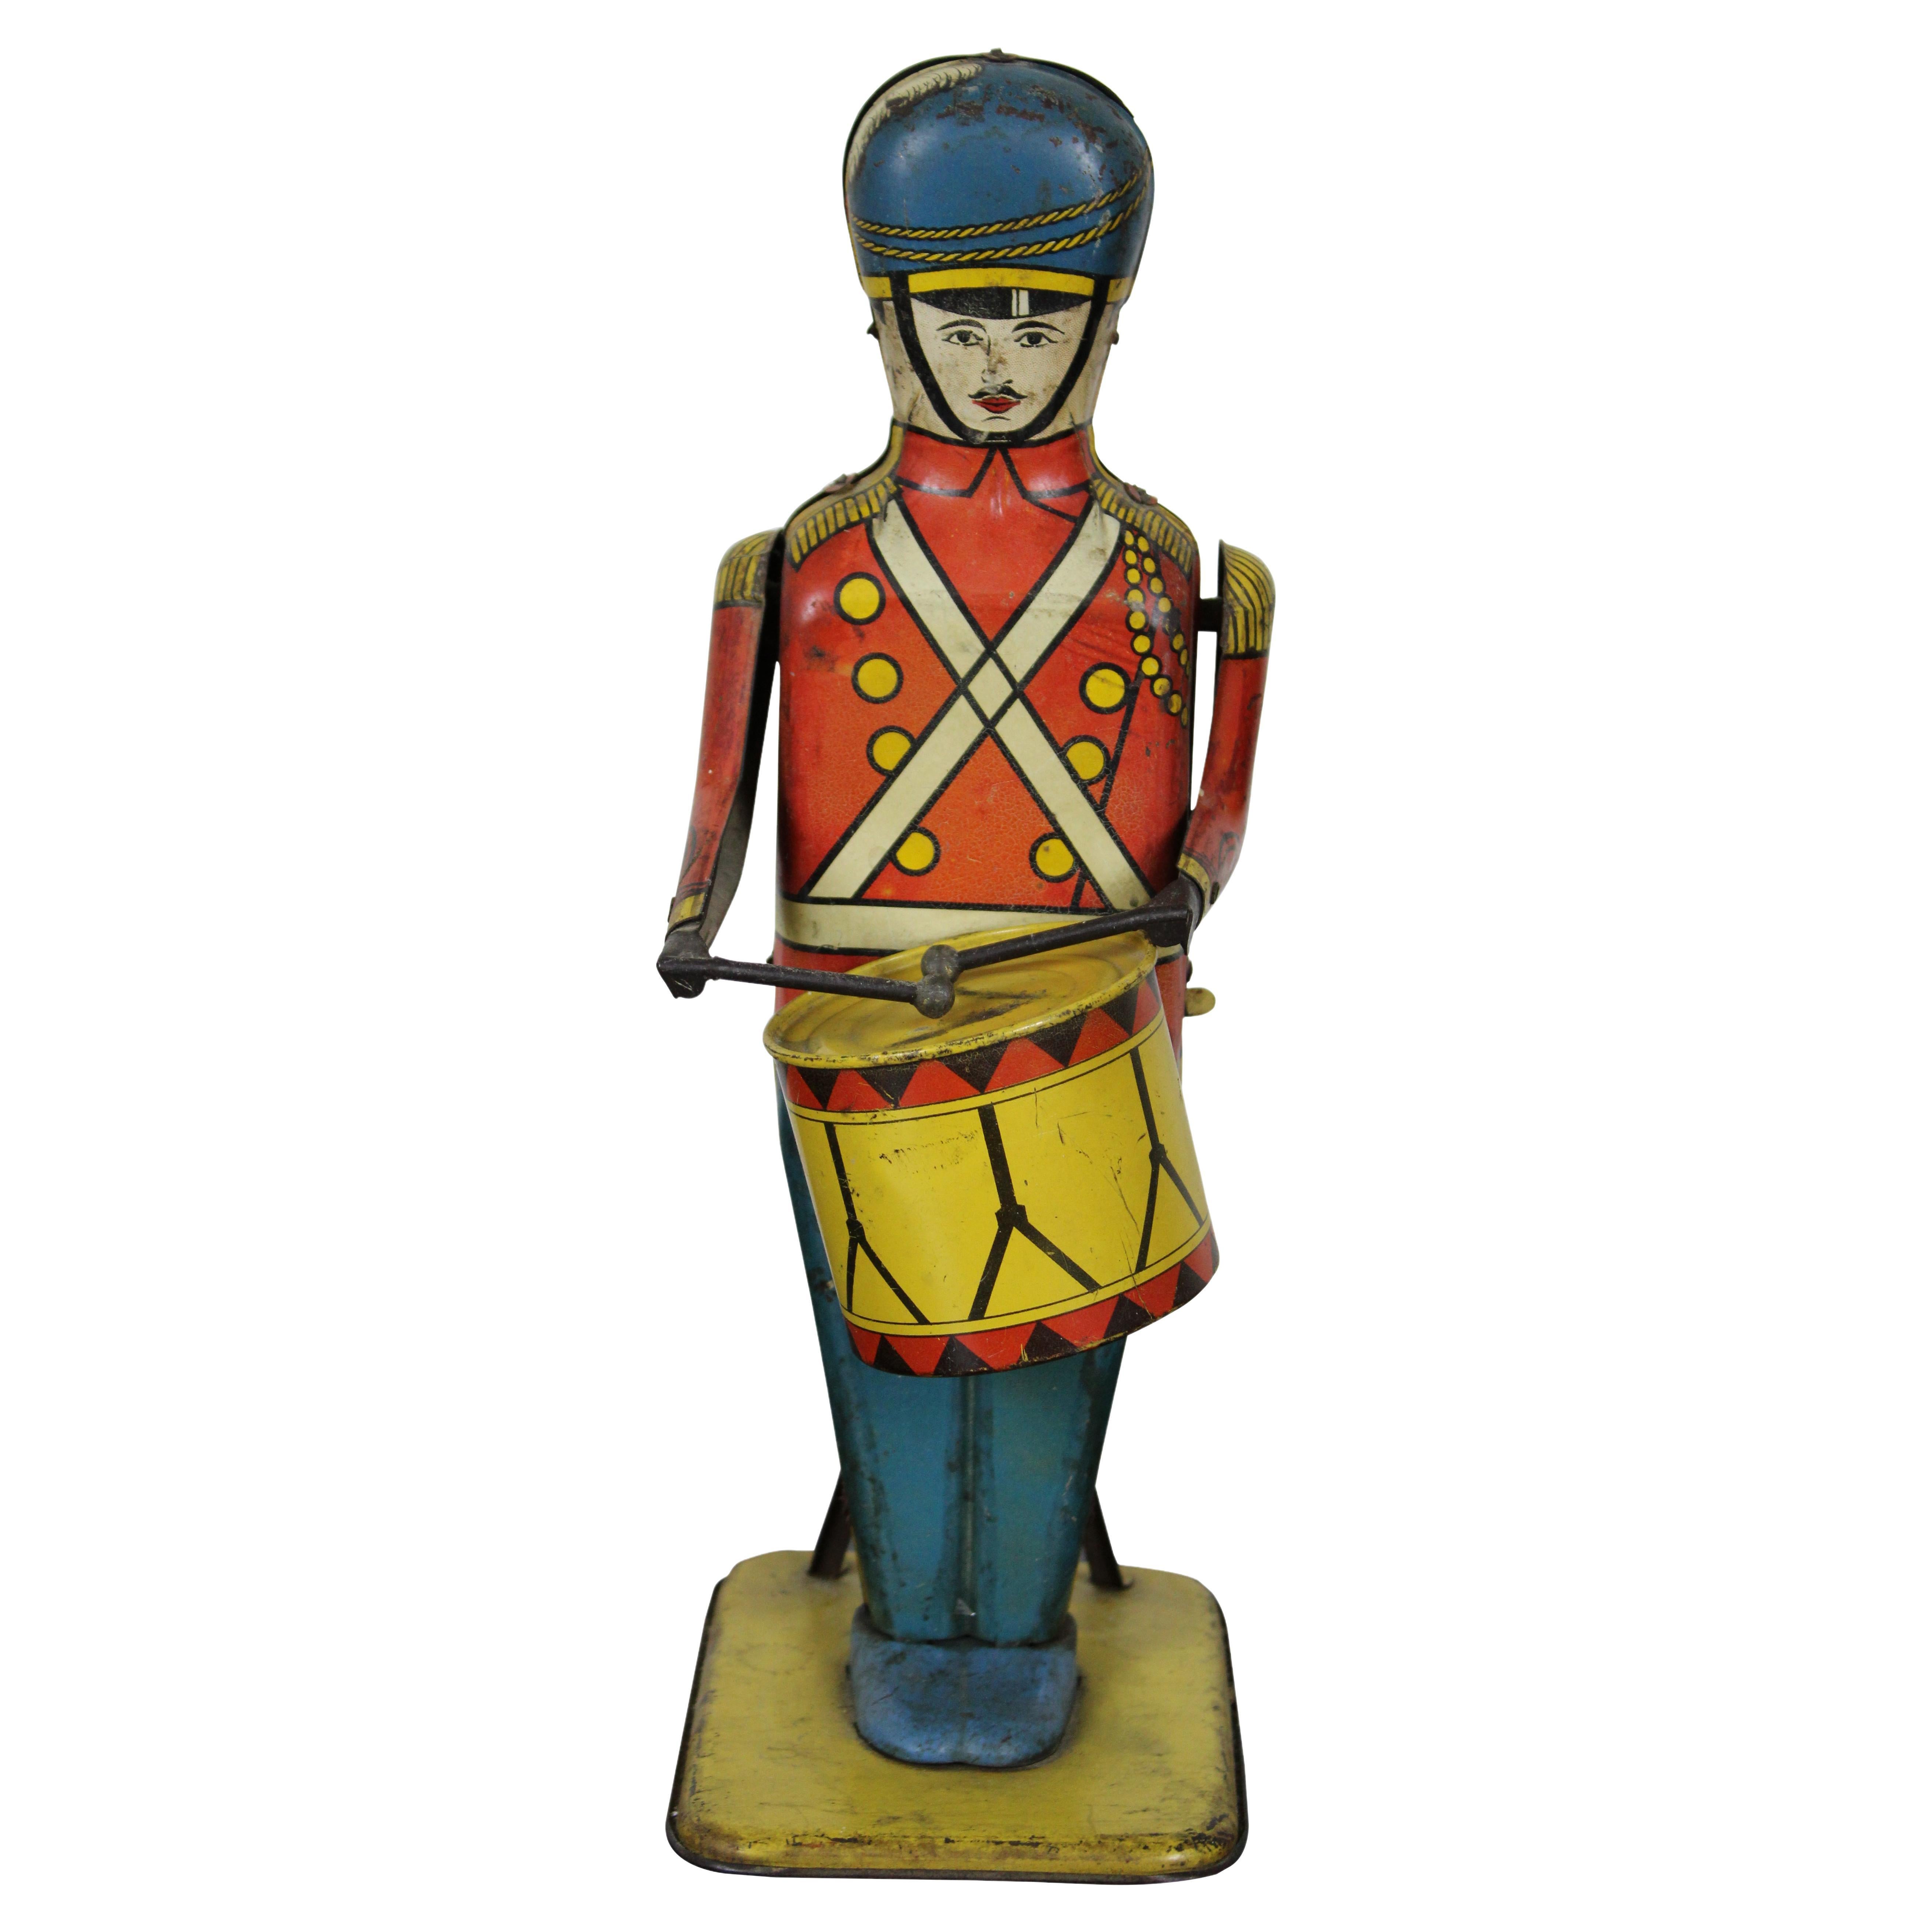 Toy lead soldier,King Henry V,rare,detailed,collectable,gift idea 